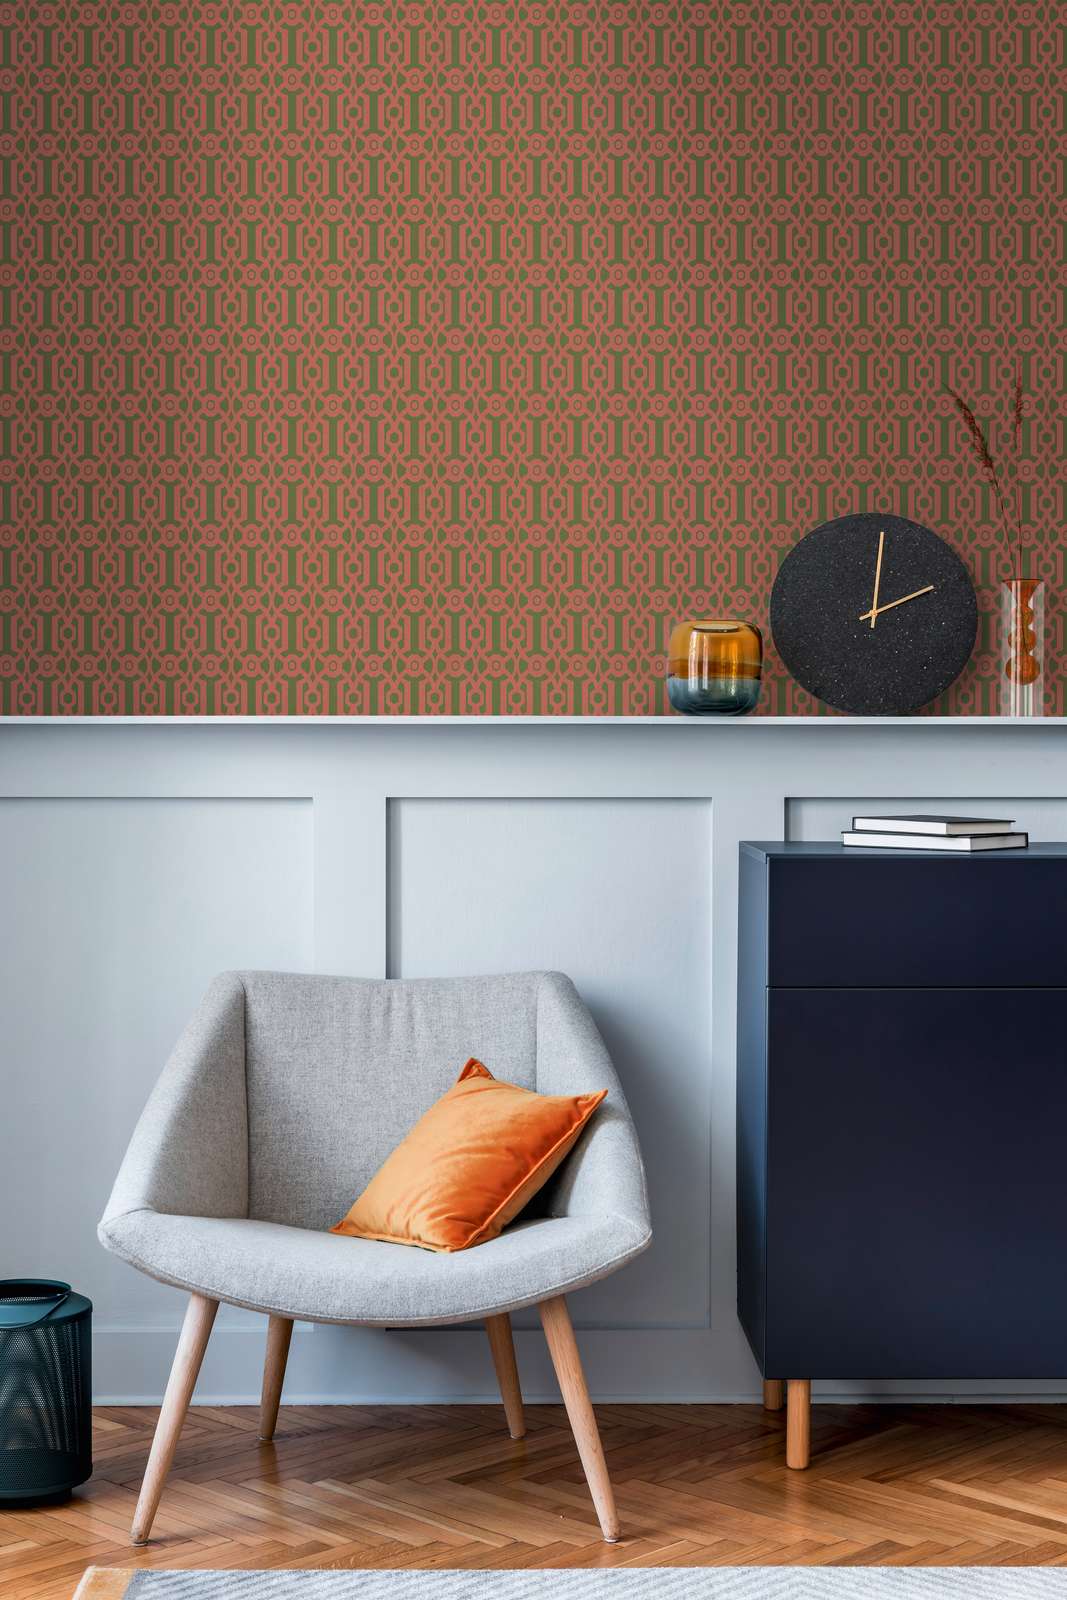             Non-woven wallpaper with graphic pattern in English style - orange, green
        